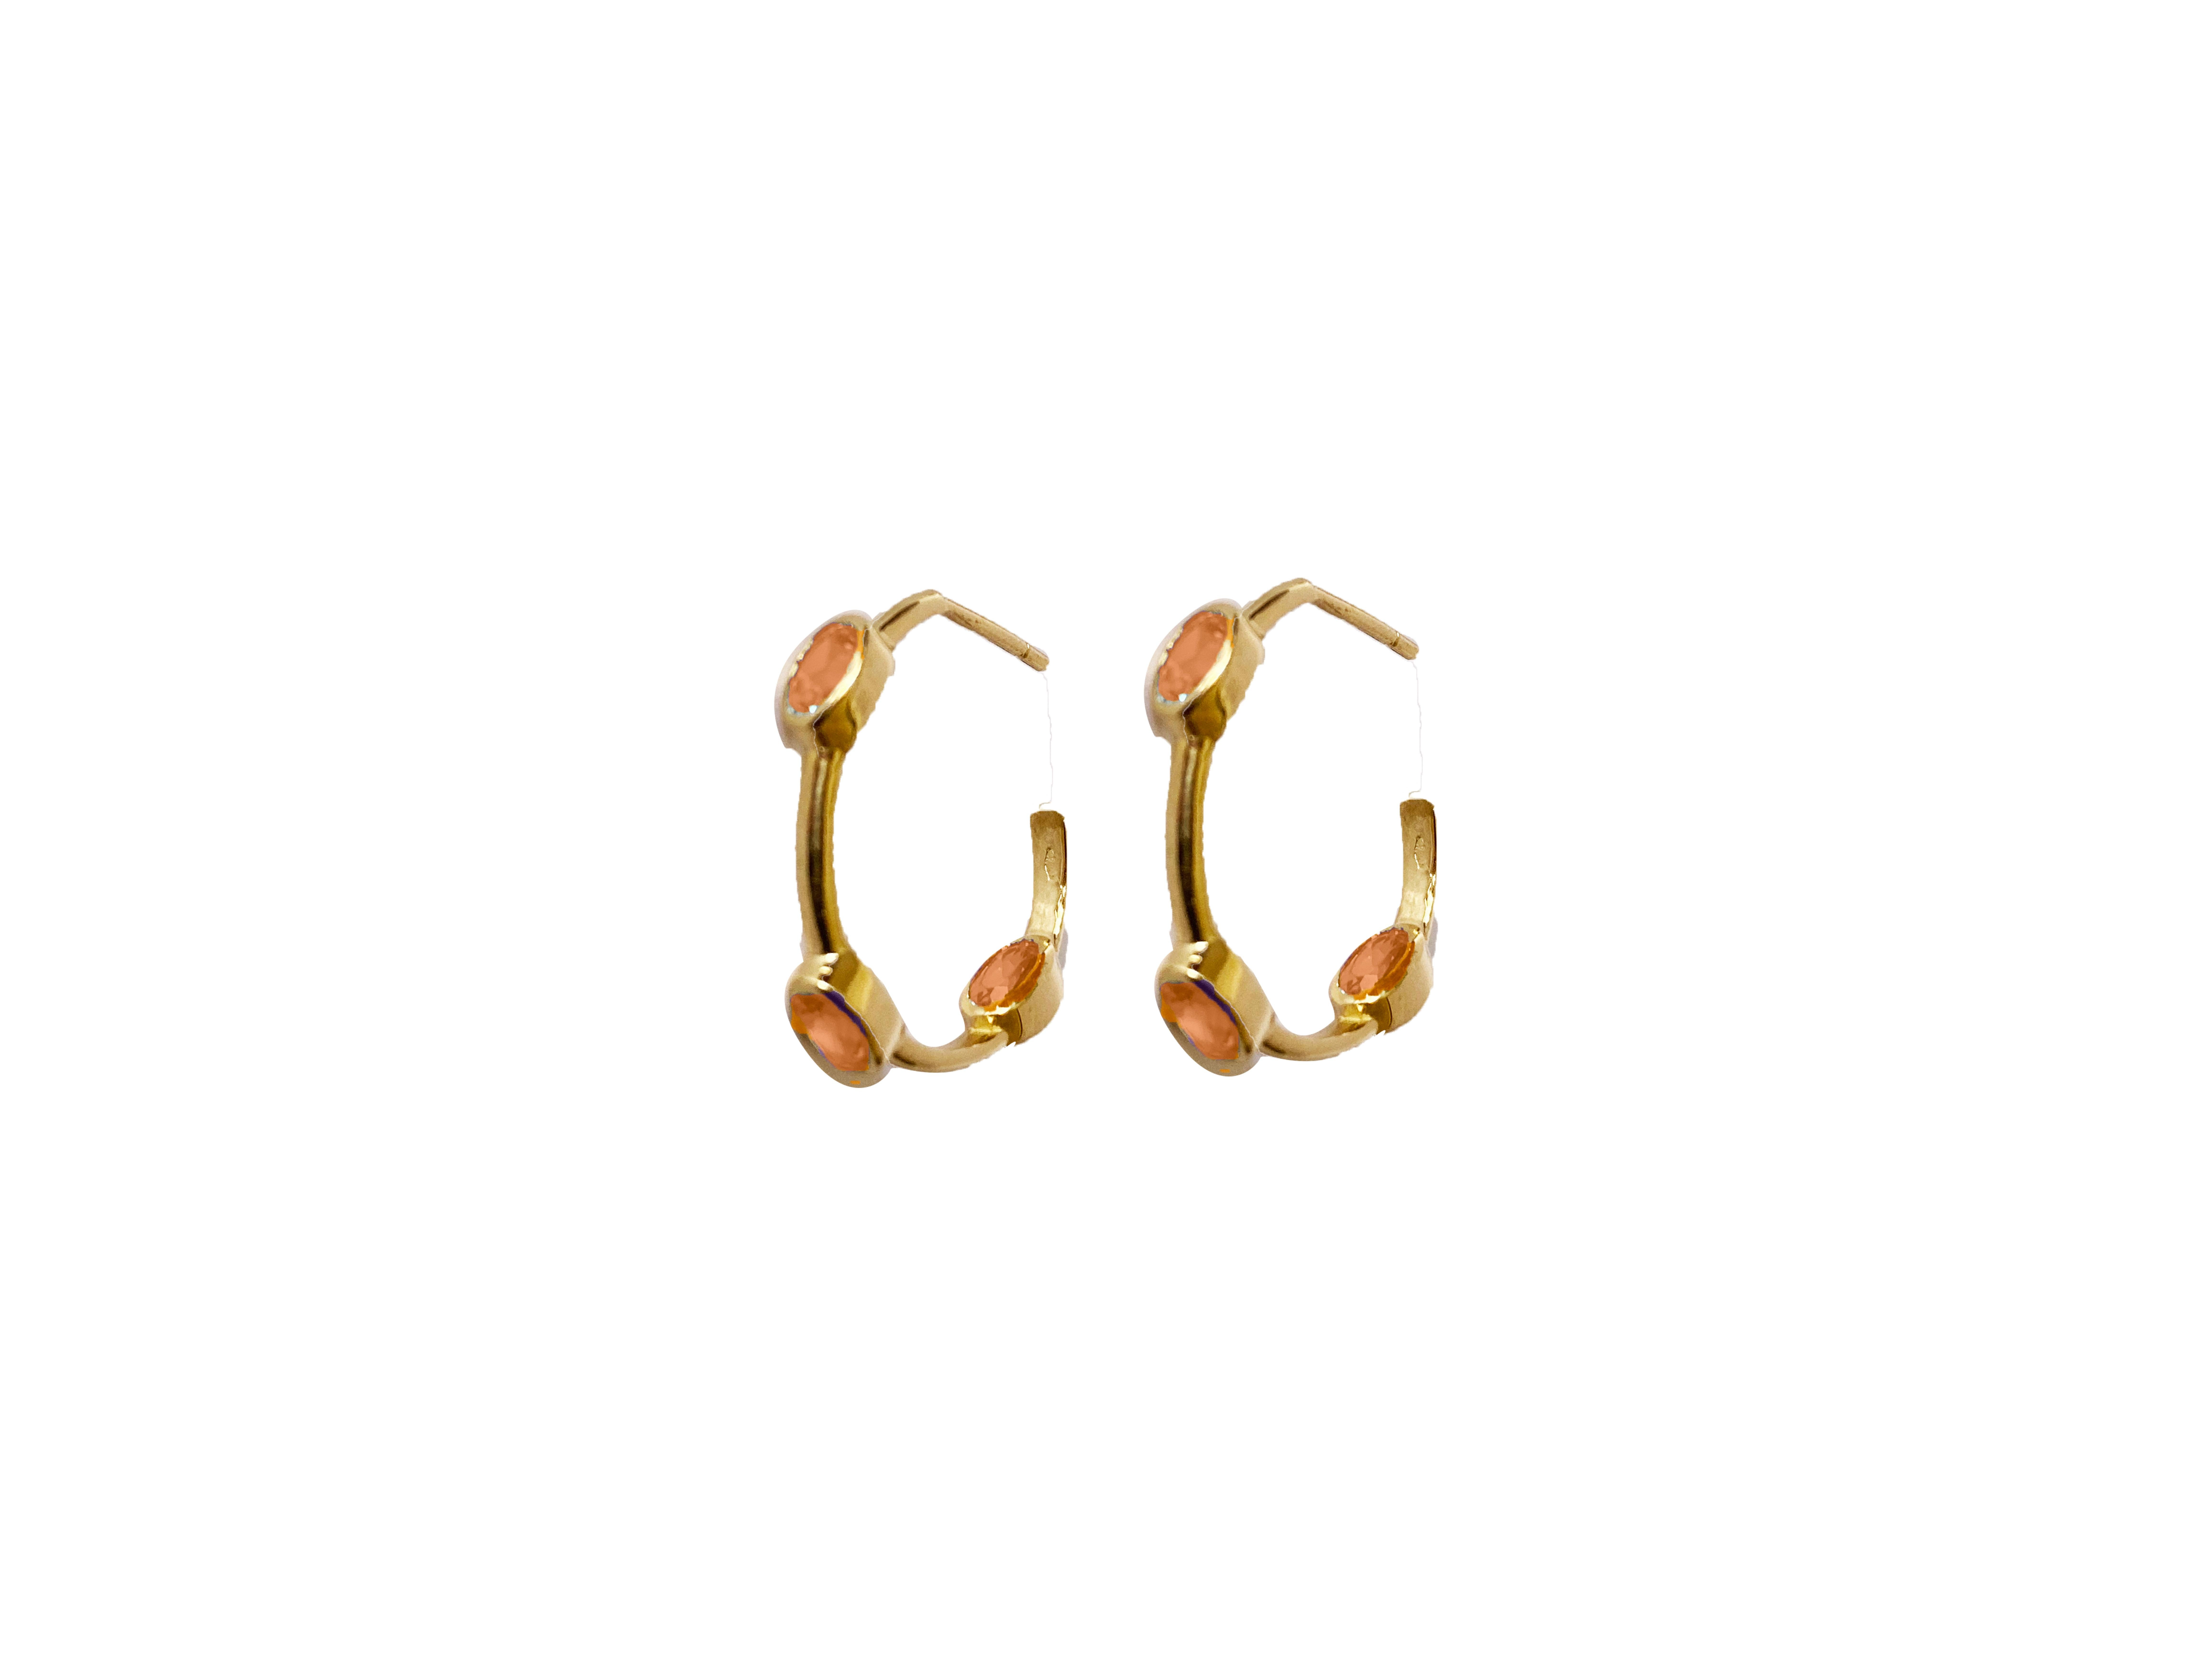 Rossella Ugolini Unisex Citrine Hoop Earrings 18K Yellow Gold Made In Italy For Sale 8